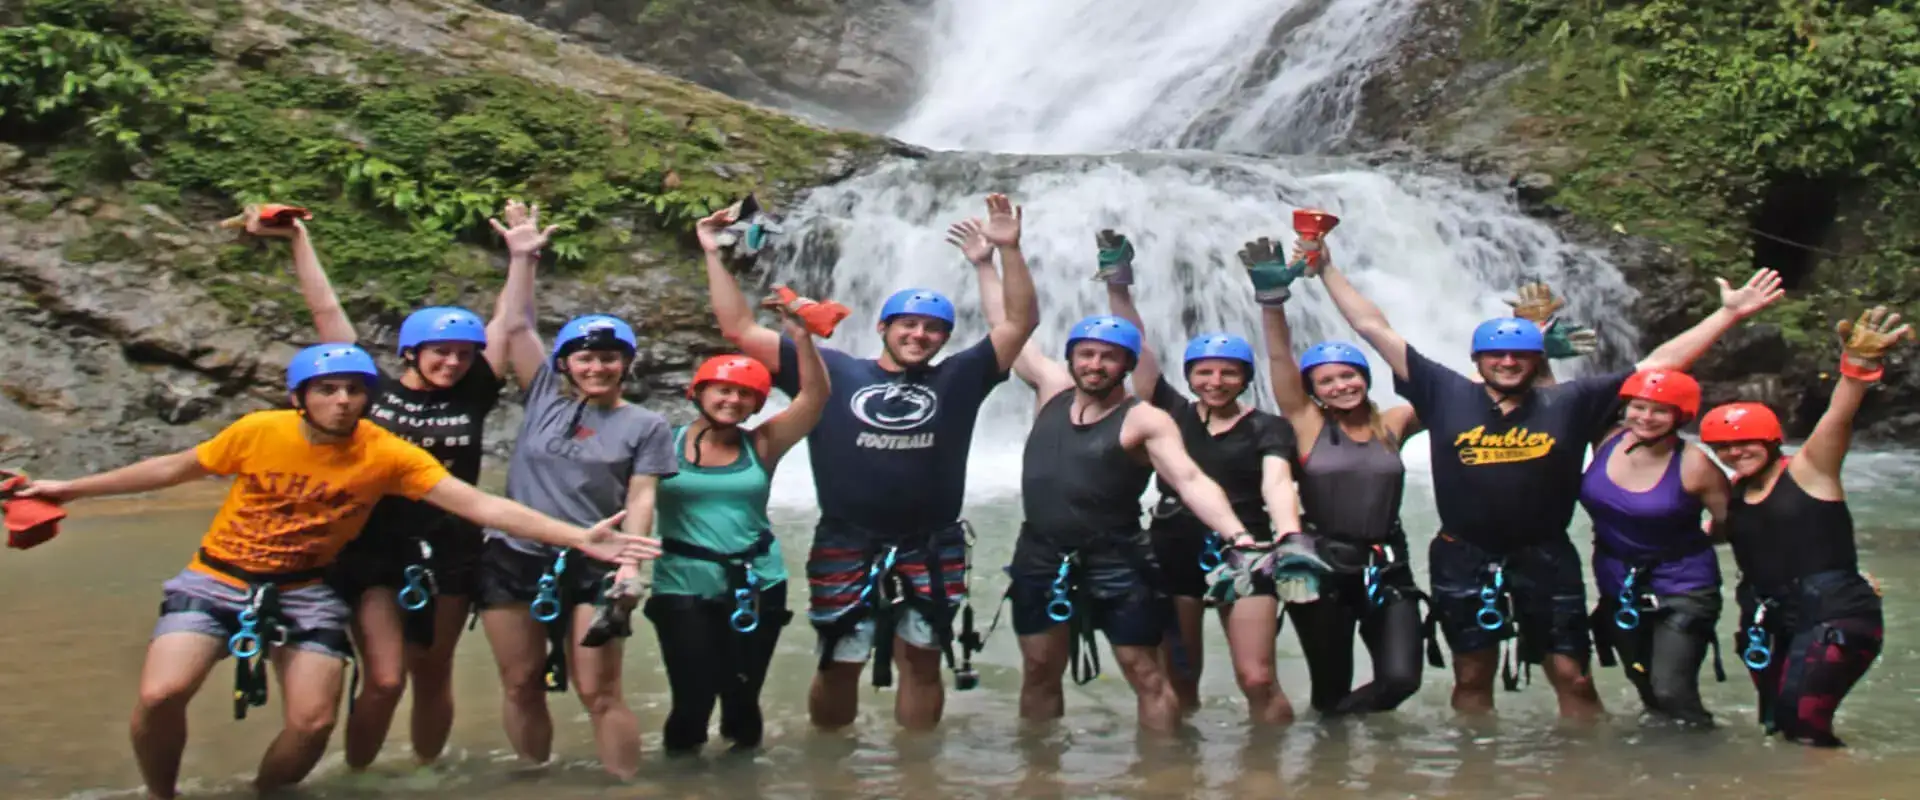 Rappelling and Canyoning Adventure | Costa Rica